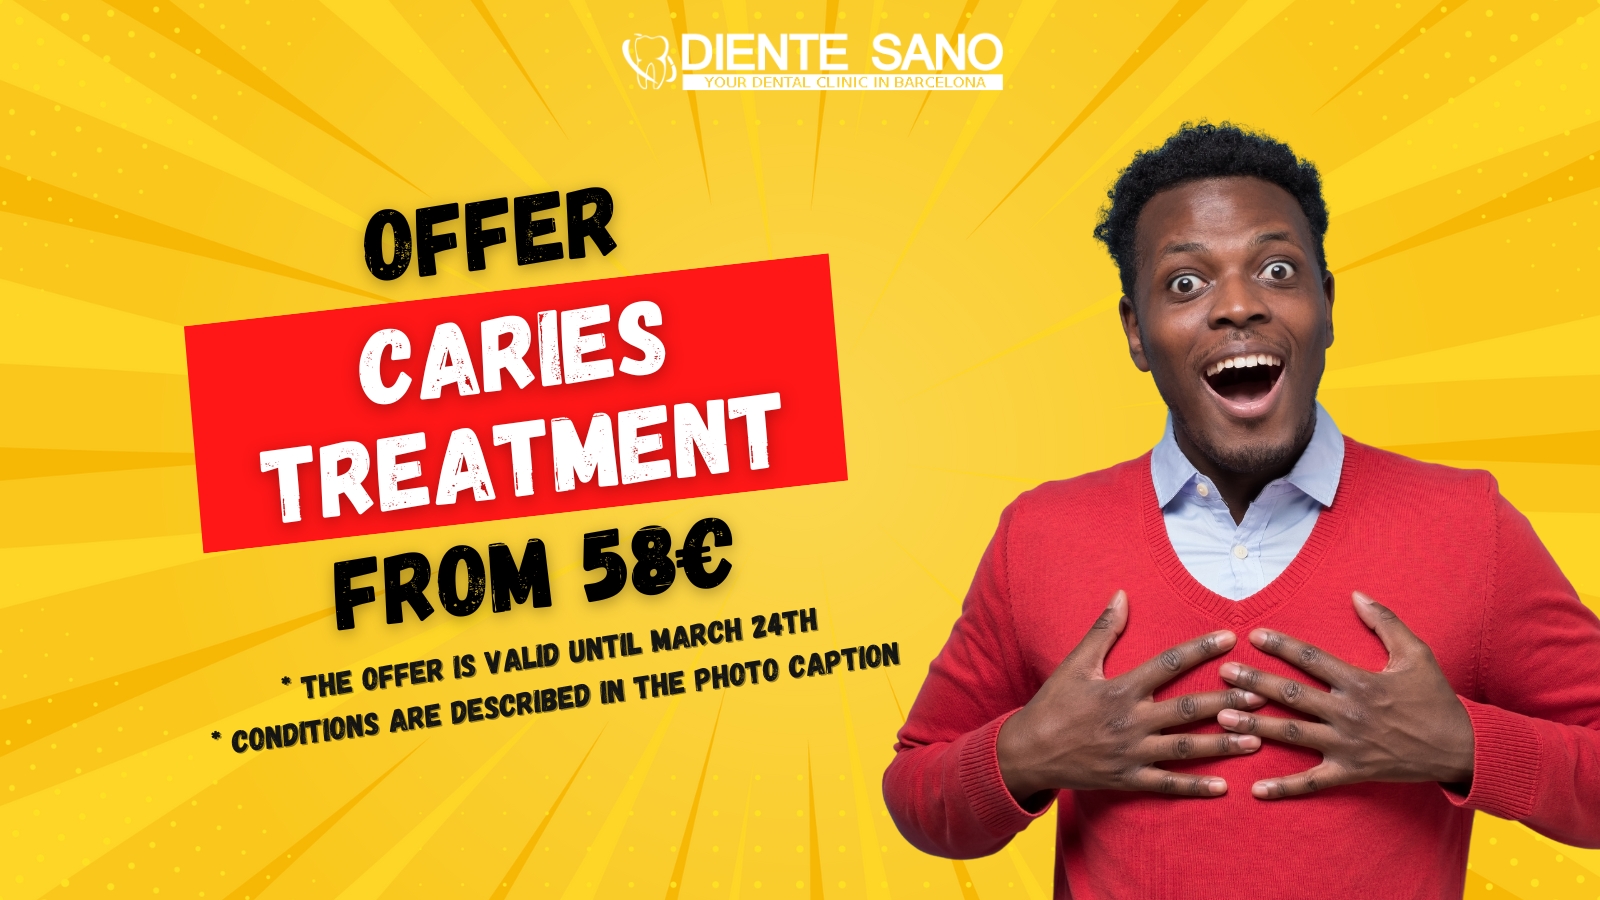 Discover affordable and quality care for your smile at Diente Sano, Barcelona! We offer a special deal on caries treatment starting at 58 euros. This is your chance to get rid of caries and prevent its further development, restoring the health and beauty of your teeth.